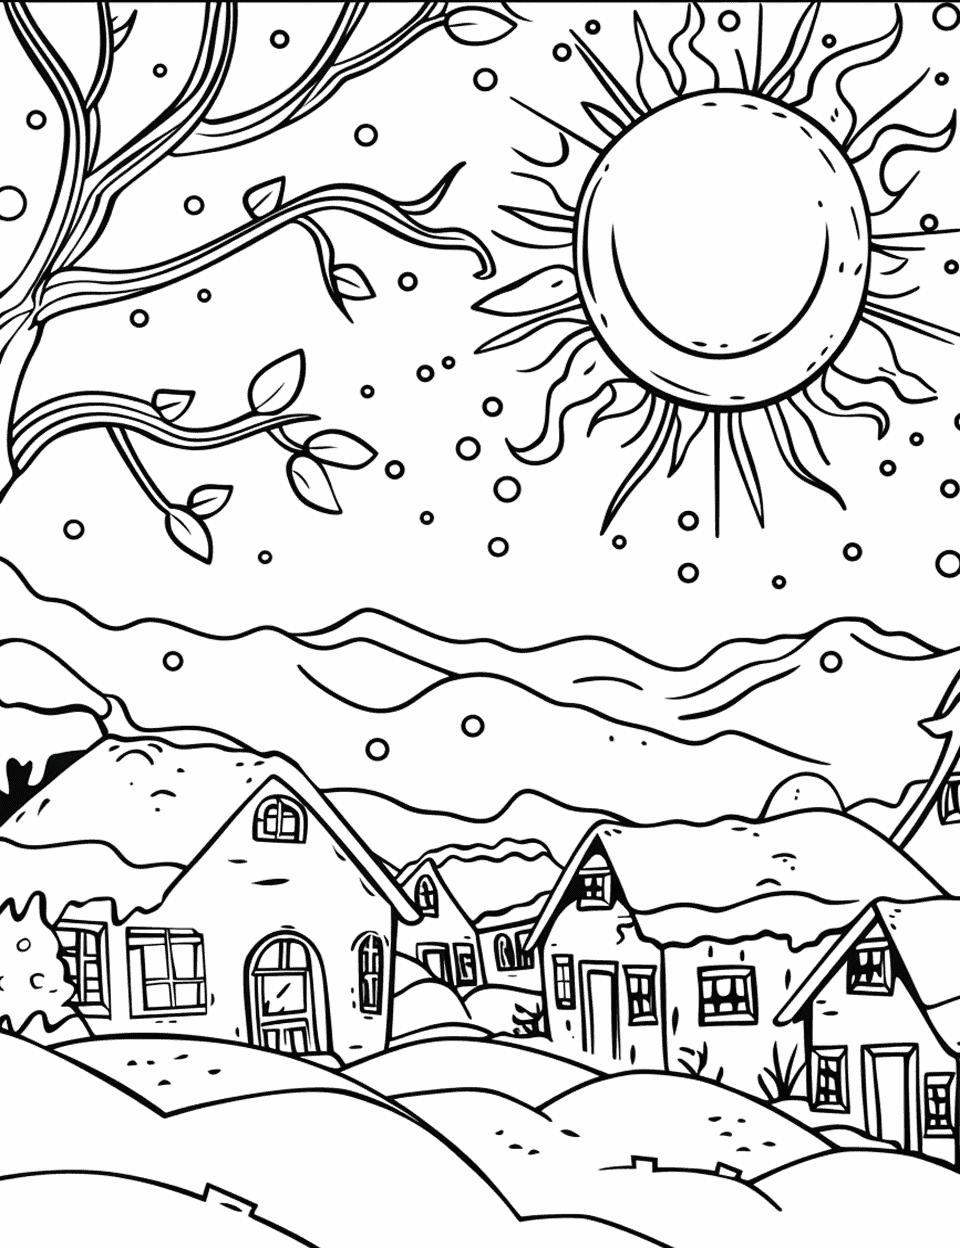 Snowy Village under Winter Sun Coloring Page - A small village covered in snow, with a weak winter sun hanging low in the sky.